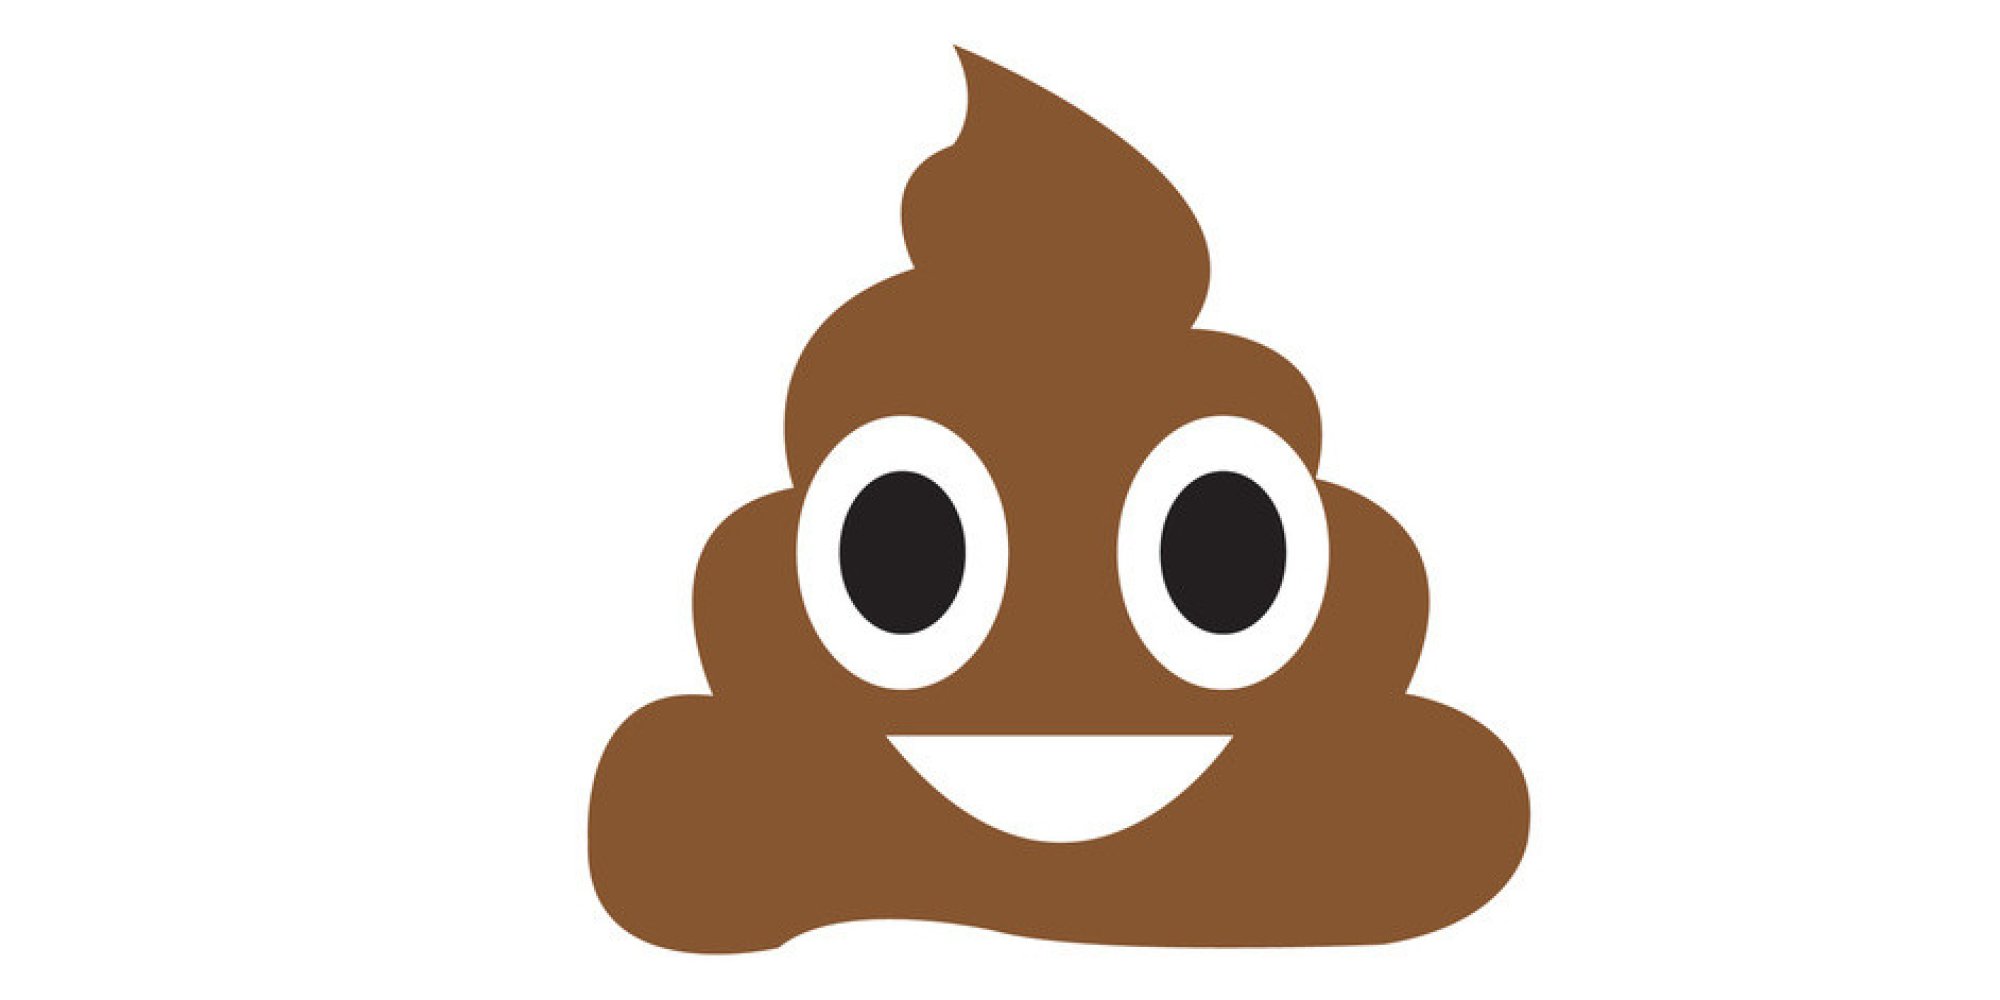 Hershey&New Logo Unveiled: Does It Resemble Poop Emoji Icon